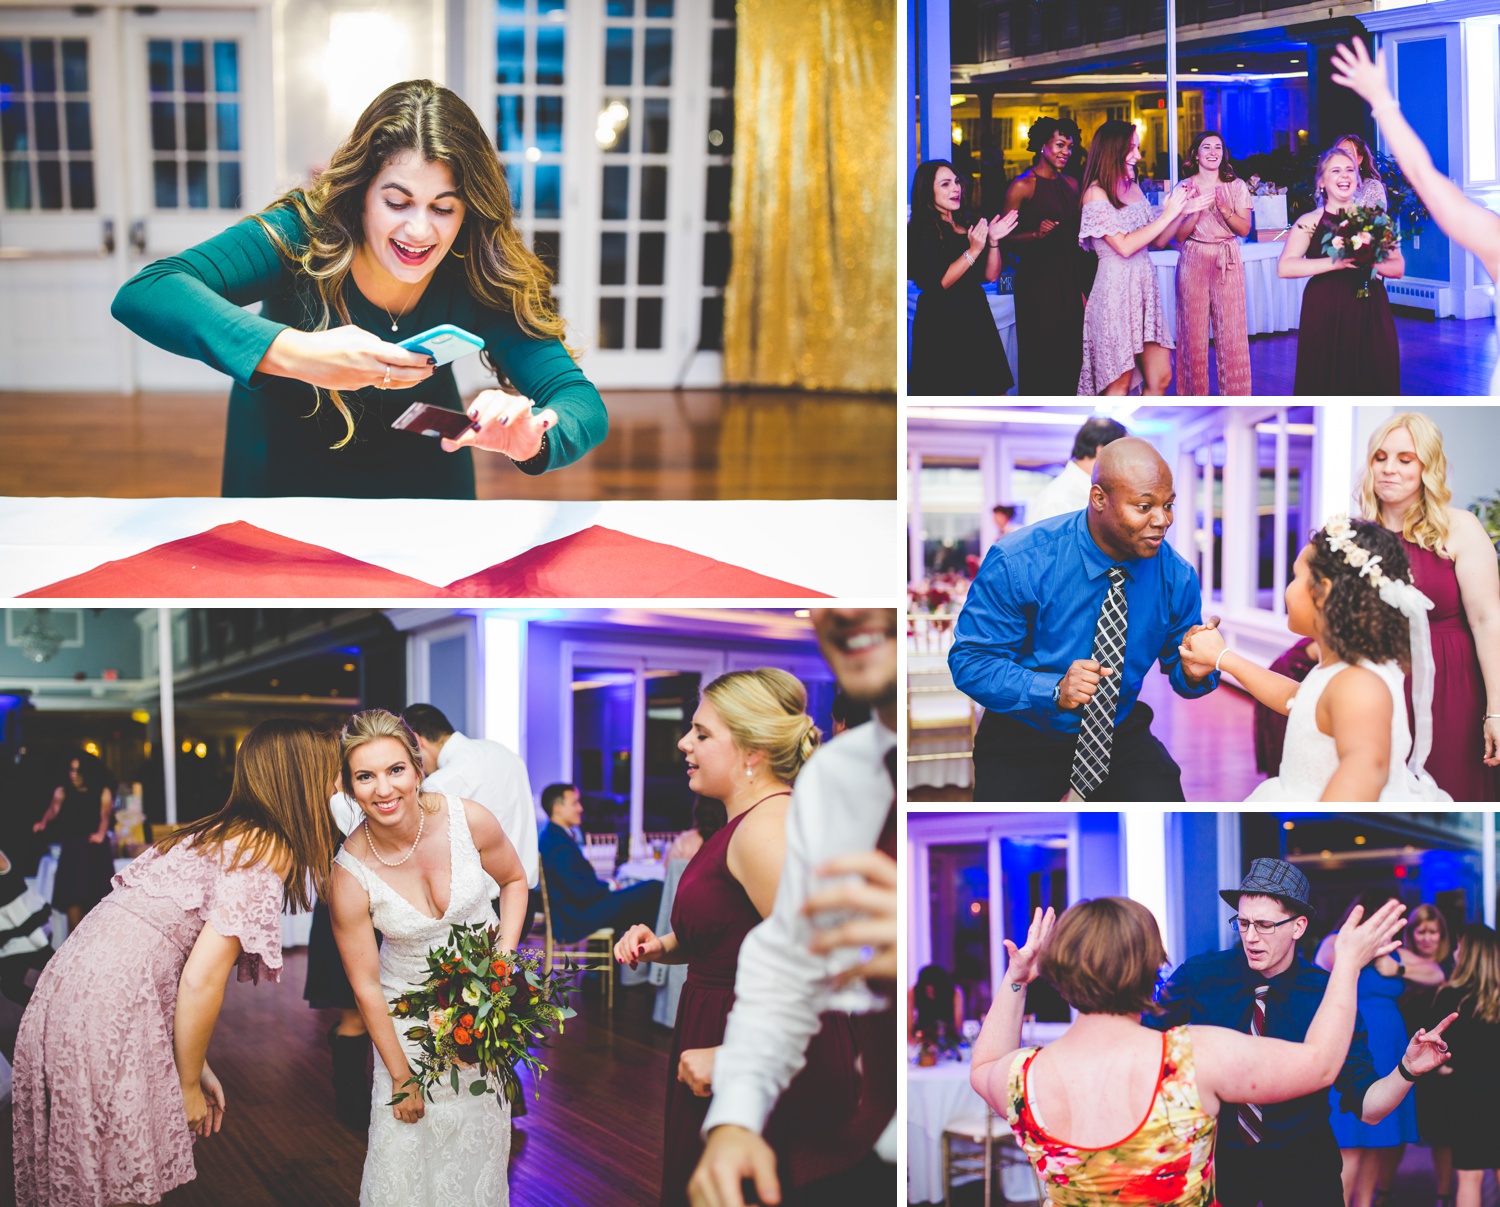 Colorful Wedding Reception Photographs in Connecticut 